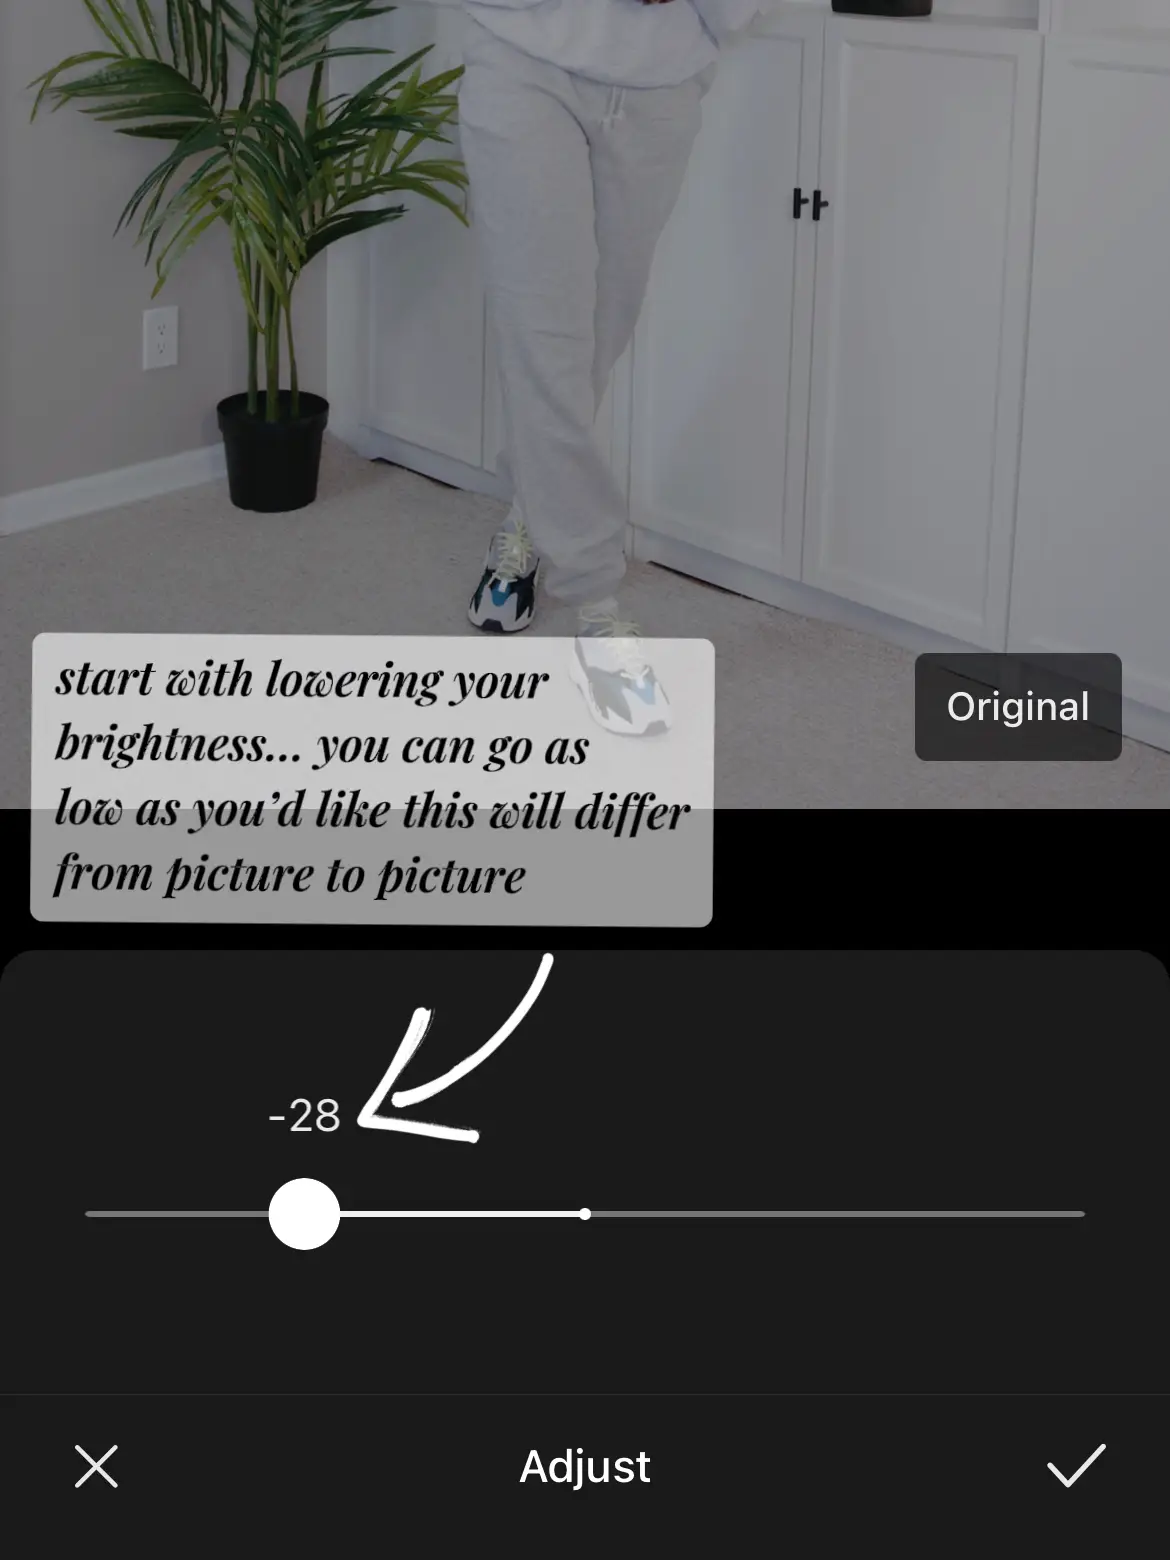  A person is standing in a room with a potted plant. The image is a screenshot of a photo editor.